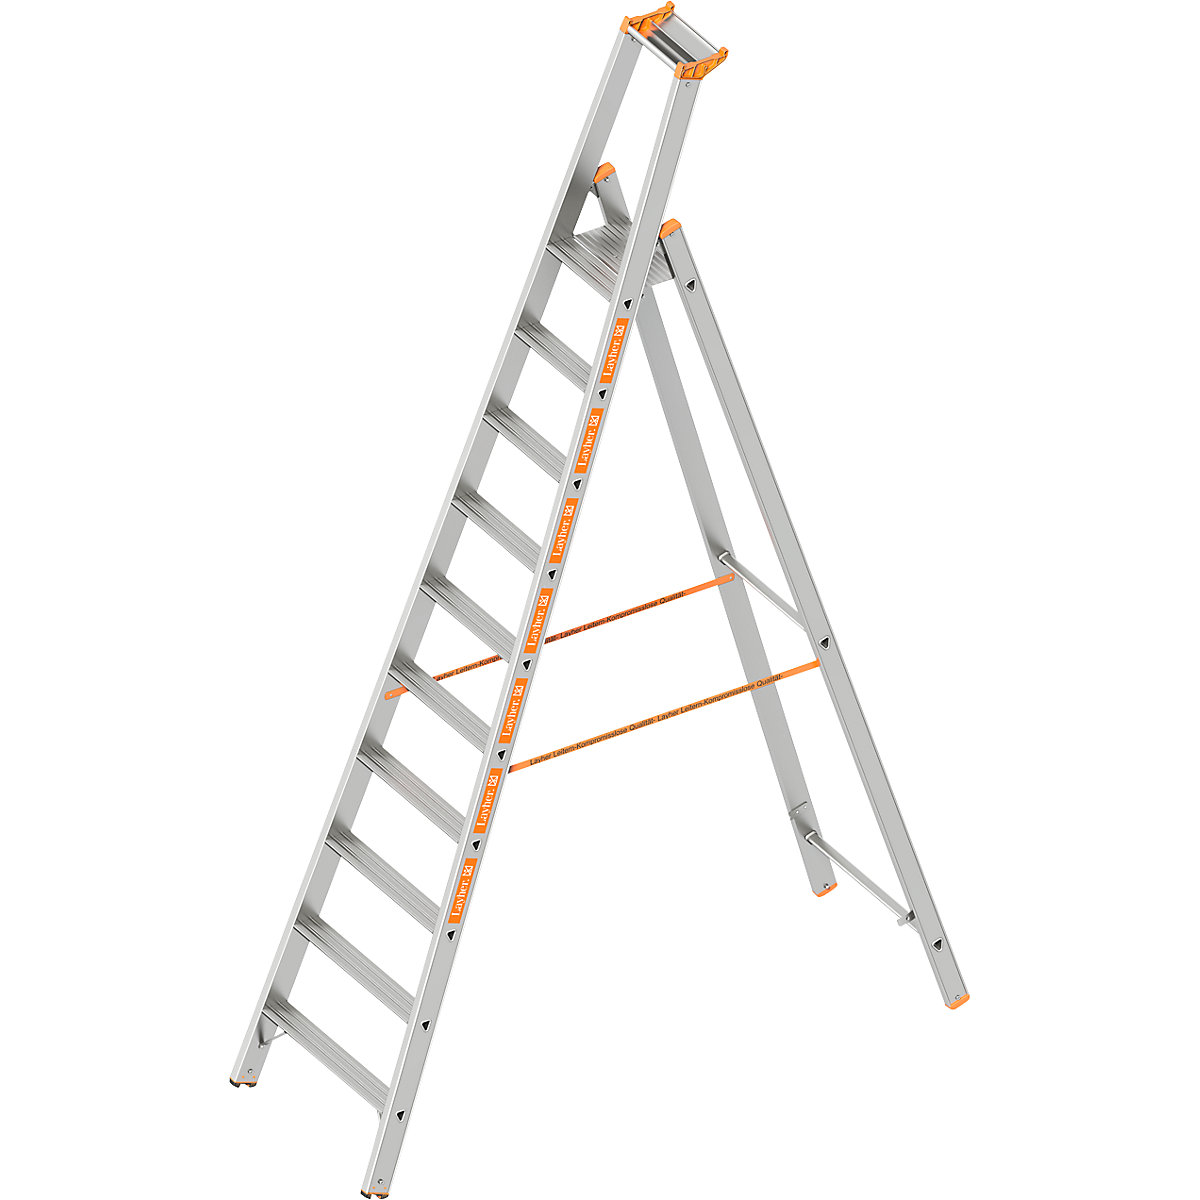 Step ladder – Layher, single sided access, 10 steps incl. platform-3